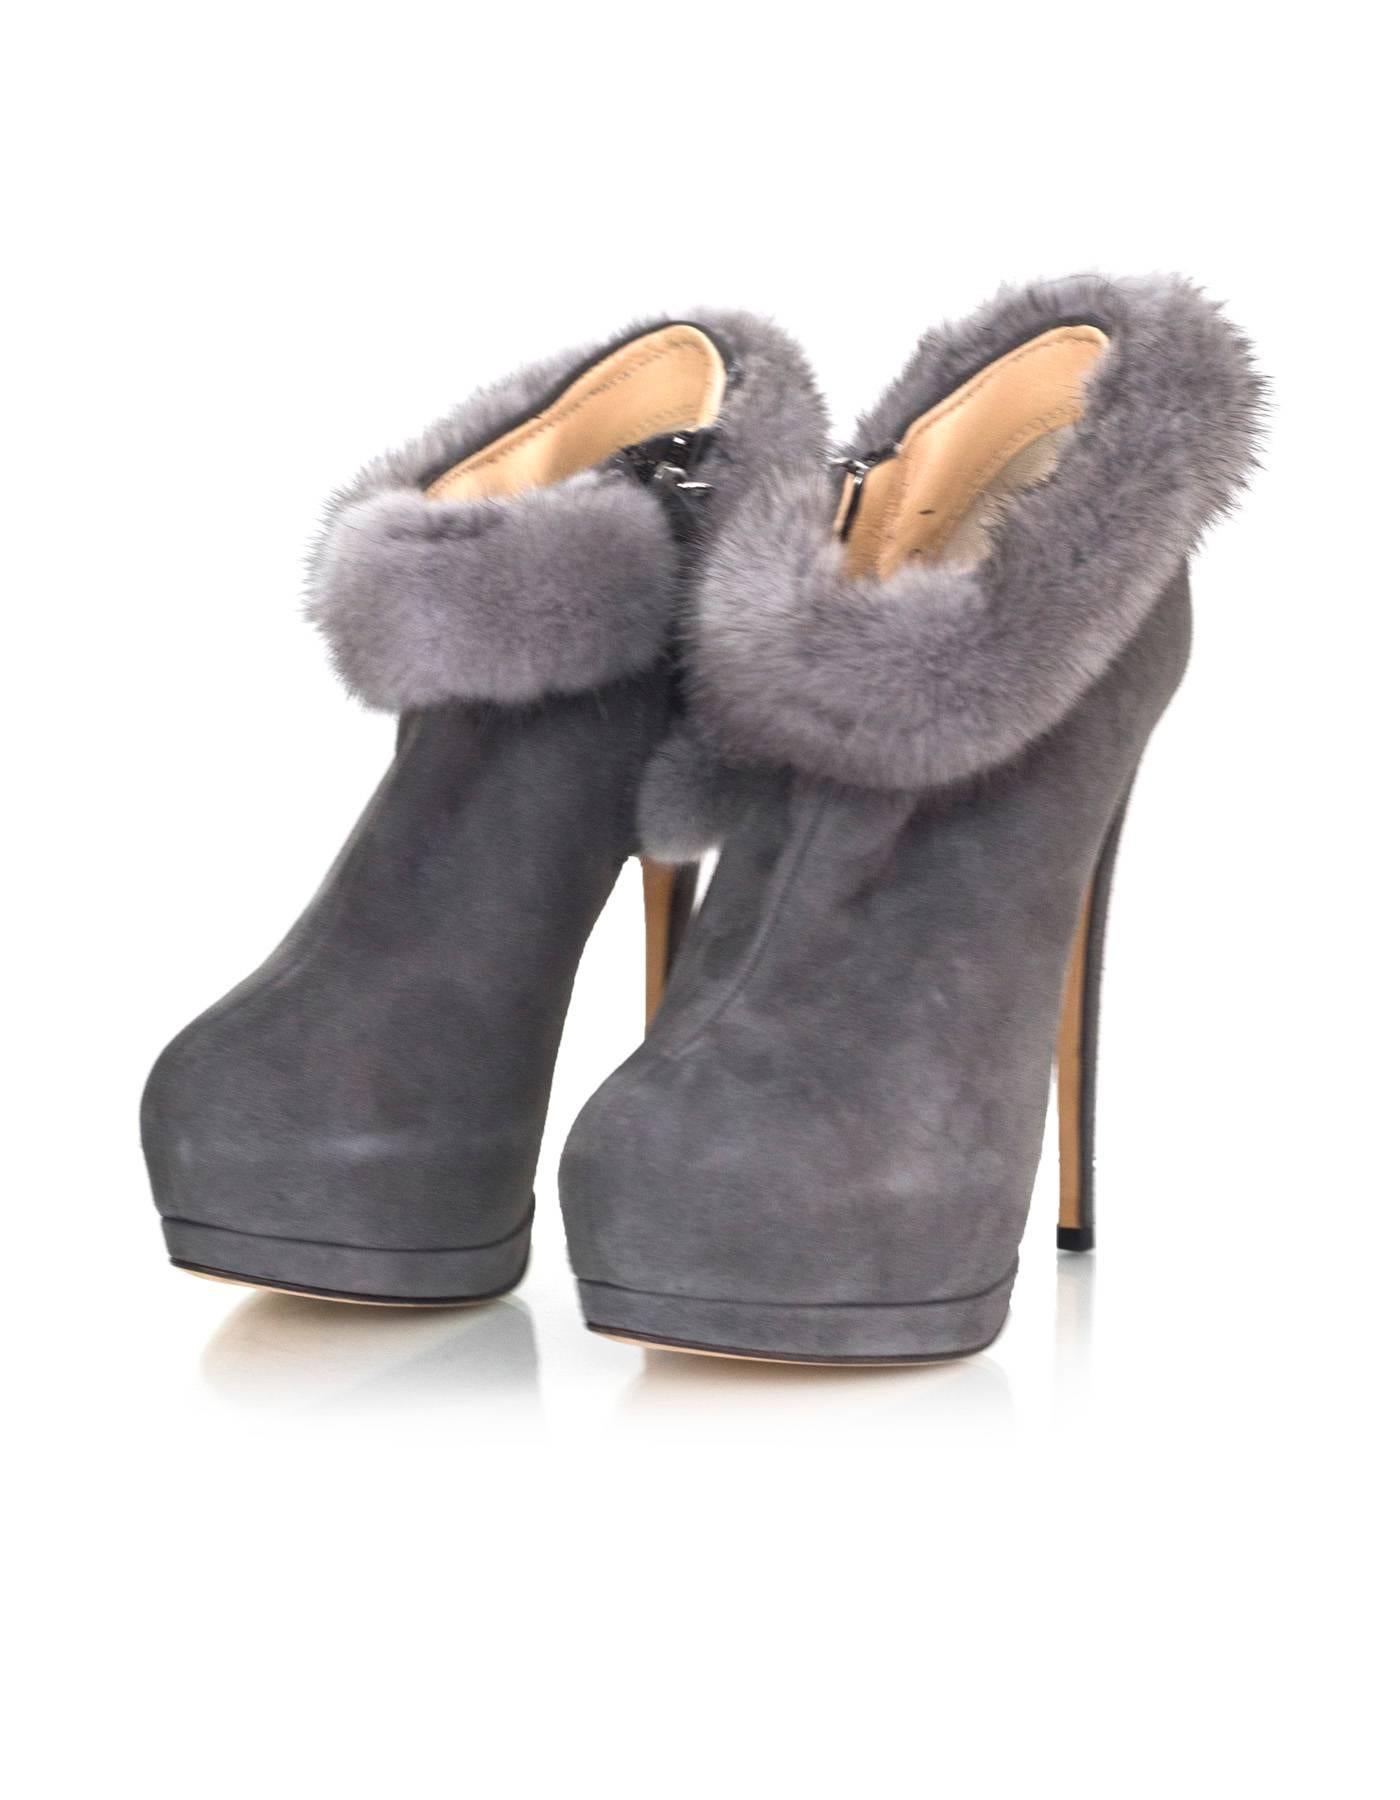 Giuseppe Zanotti Grey Suede and Fur Bootie Sz 36 
Features hidden platform

Made In: Italy
Color: Grey
Materials: Suede, fur
Closure/Opening: Side zip closure
Sole Stamp: Vero Cuoio Made in Italy 36
Overall Condition: Excellent- appear to have not